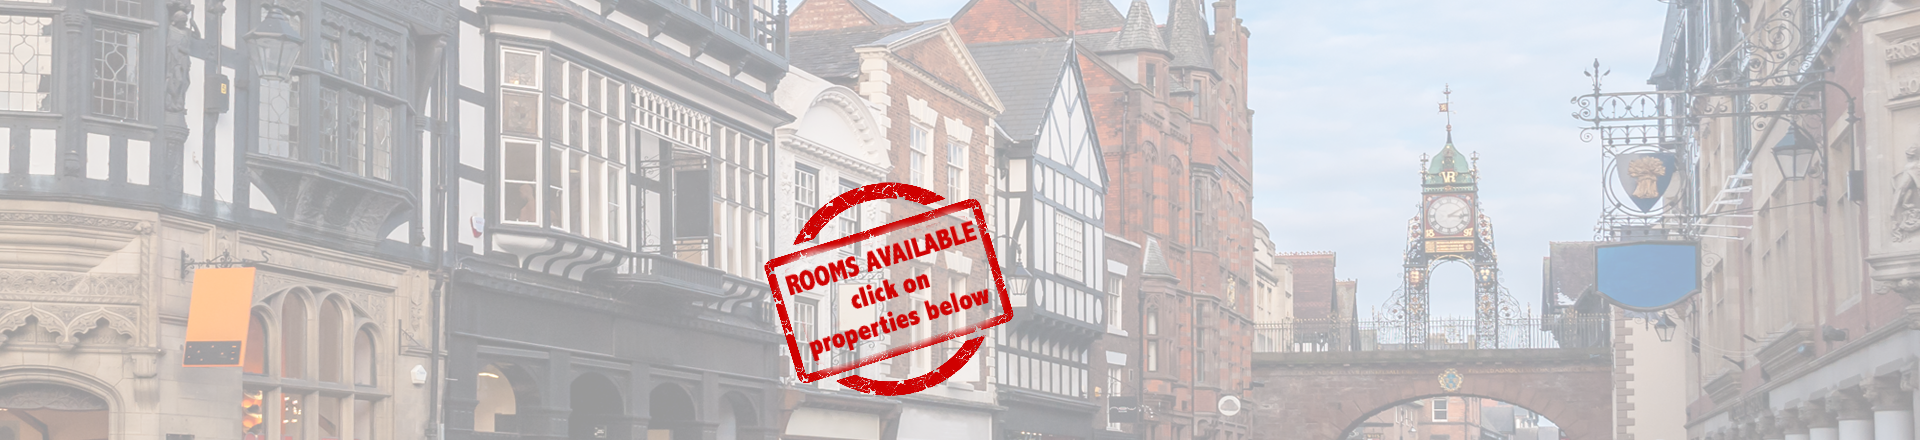 Student Accommodation Chester